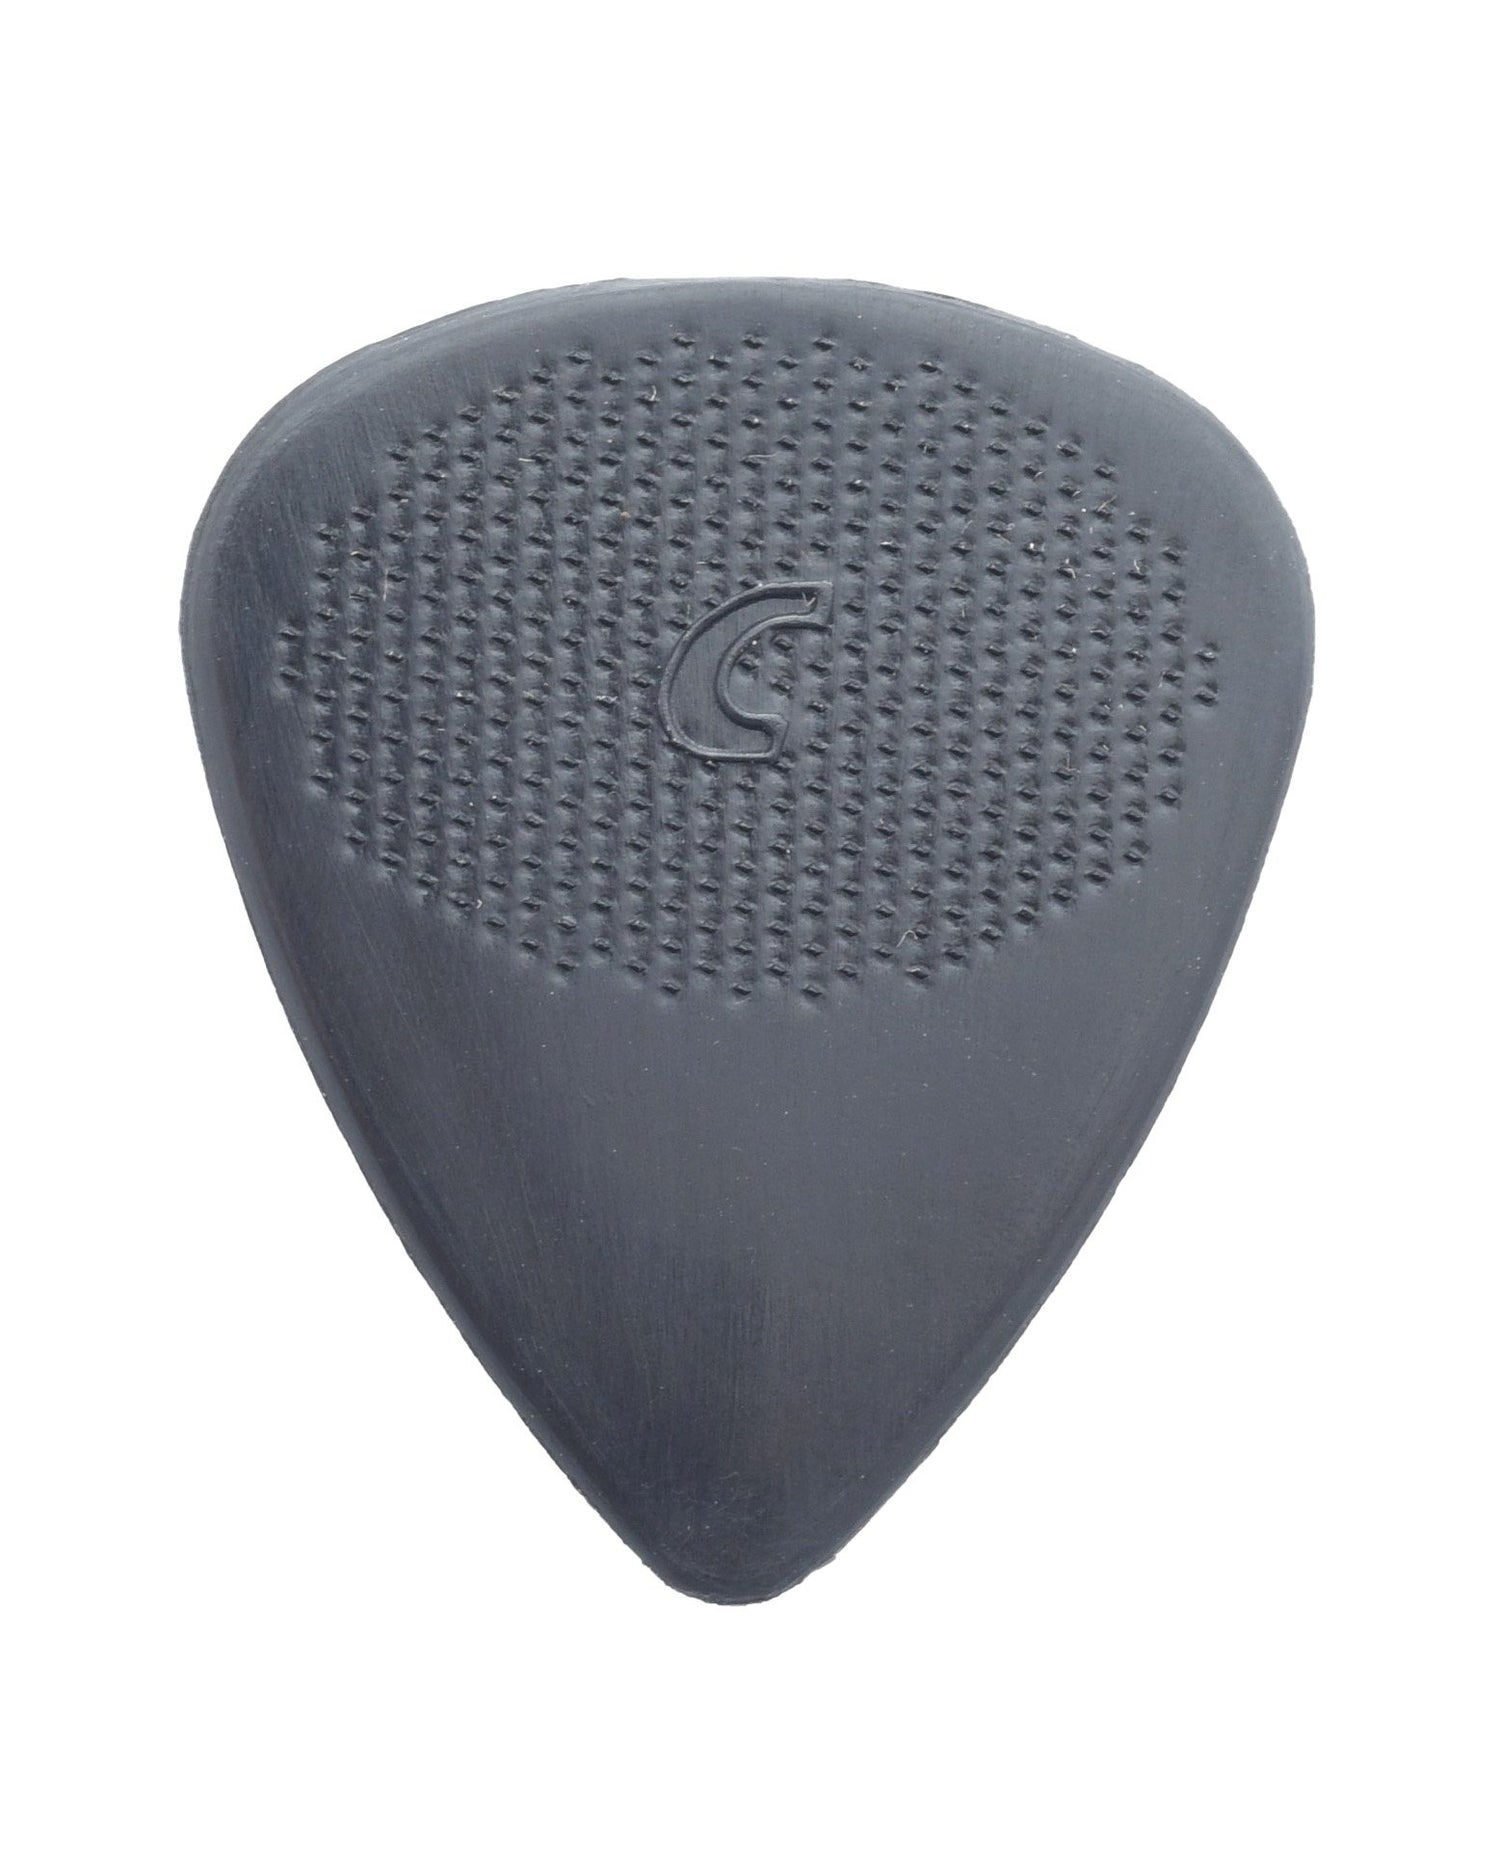 Front of Cool Picks "Cat Tongue" Nylon Pick .88MM Thick